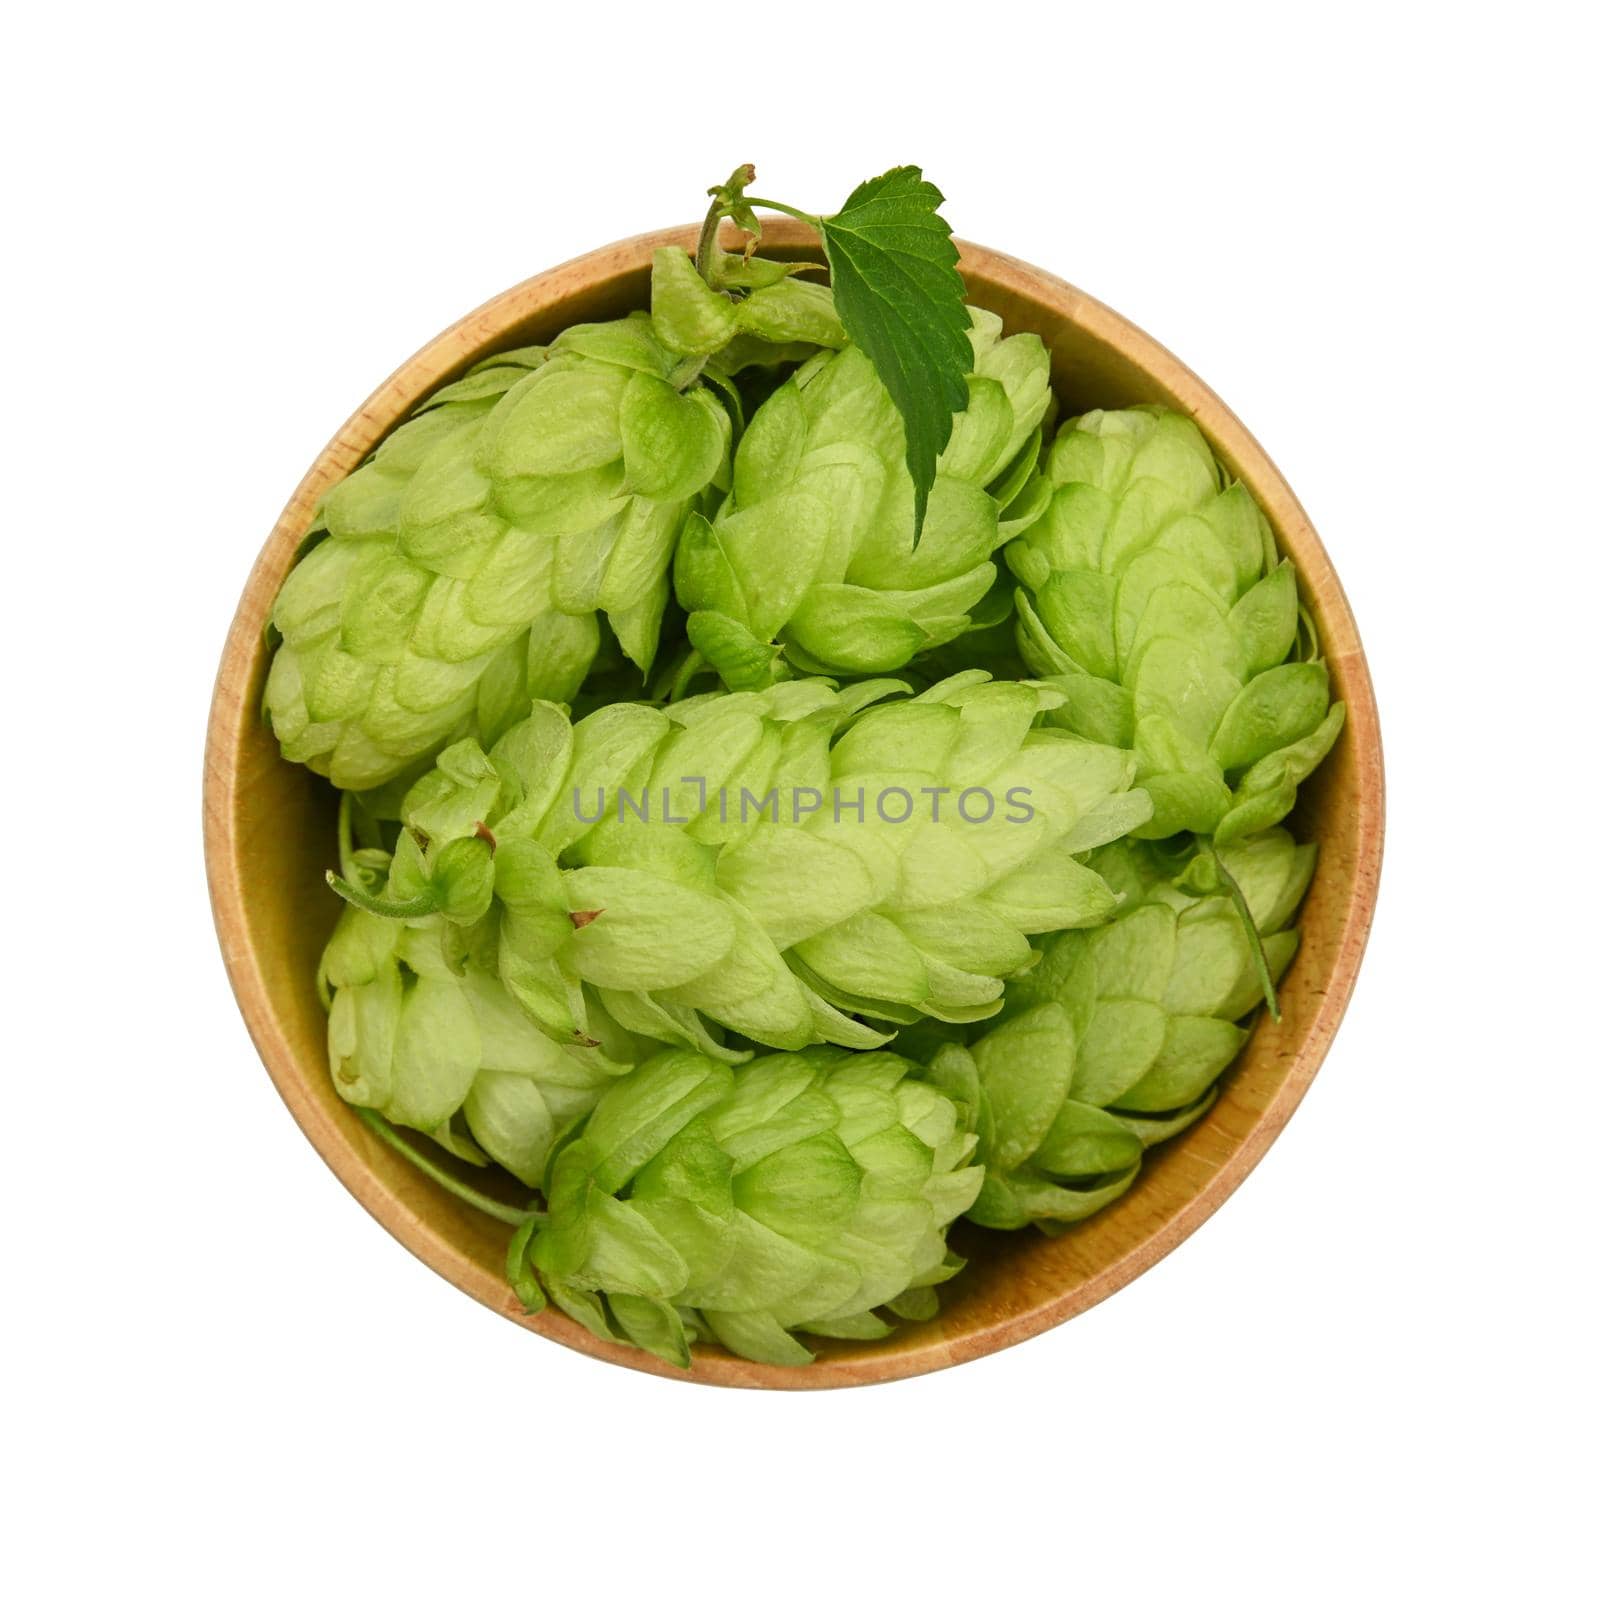 Wooden bowl of fresh green hops isolated on white by BreakingTheWalls